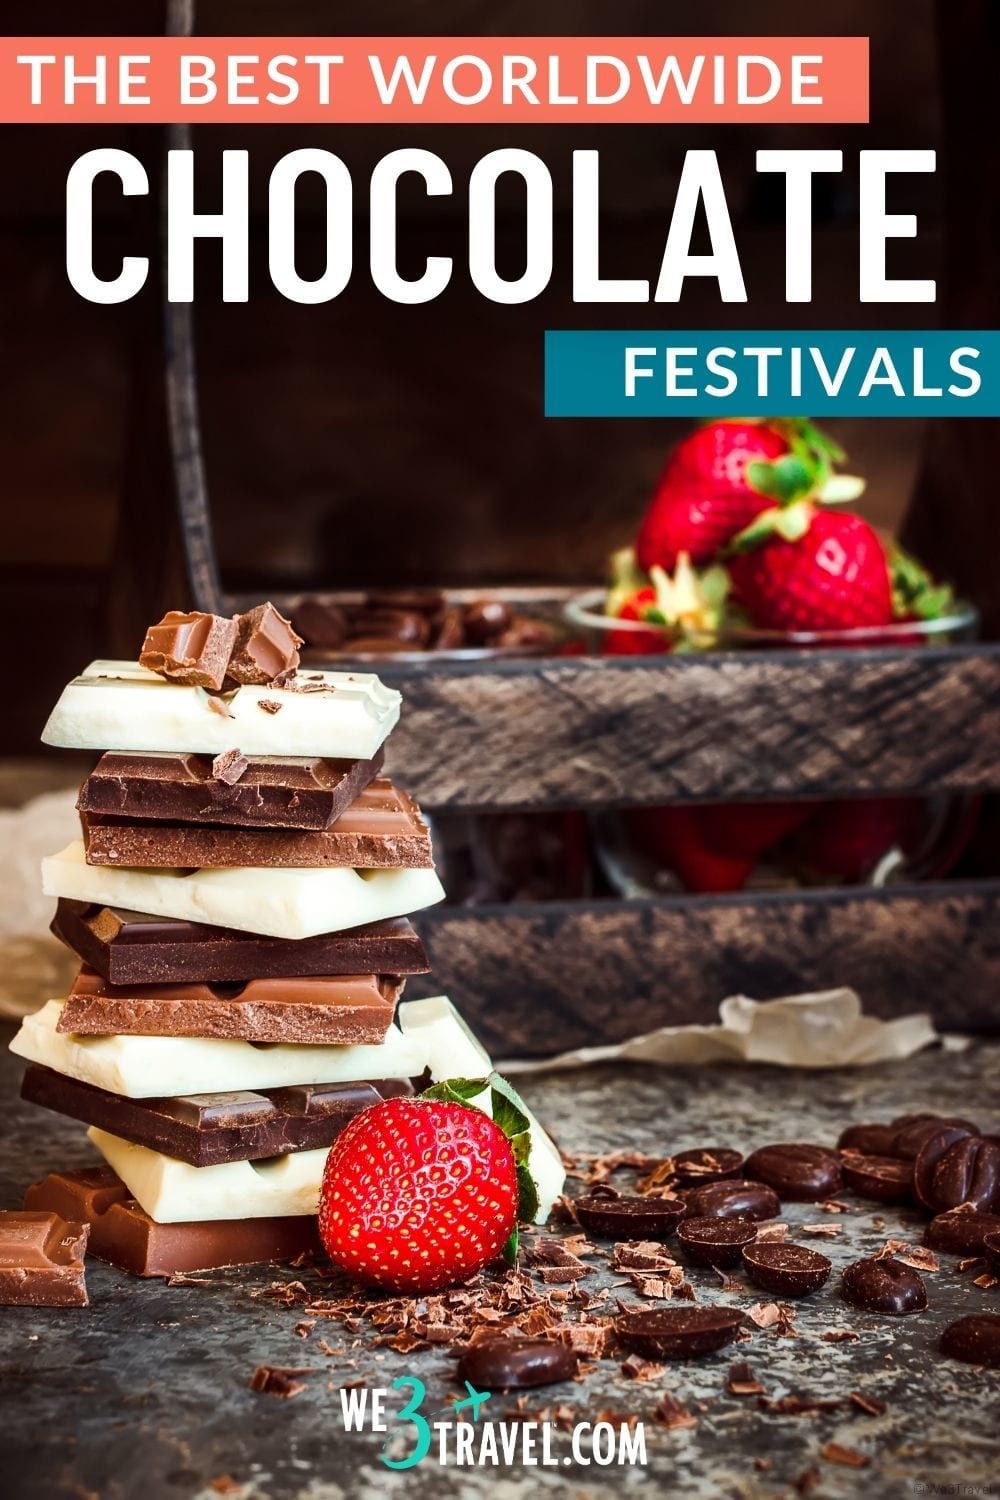 25 Chocolate Festivals Around the World Worth Traveling to See [and Taste]